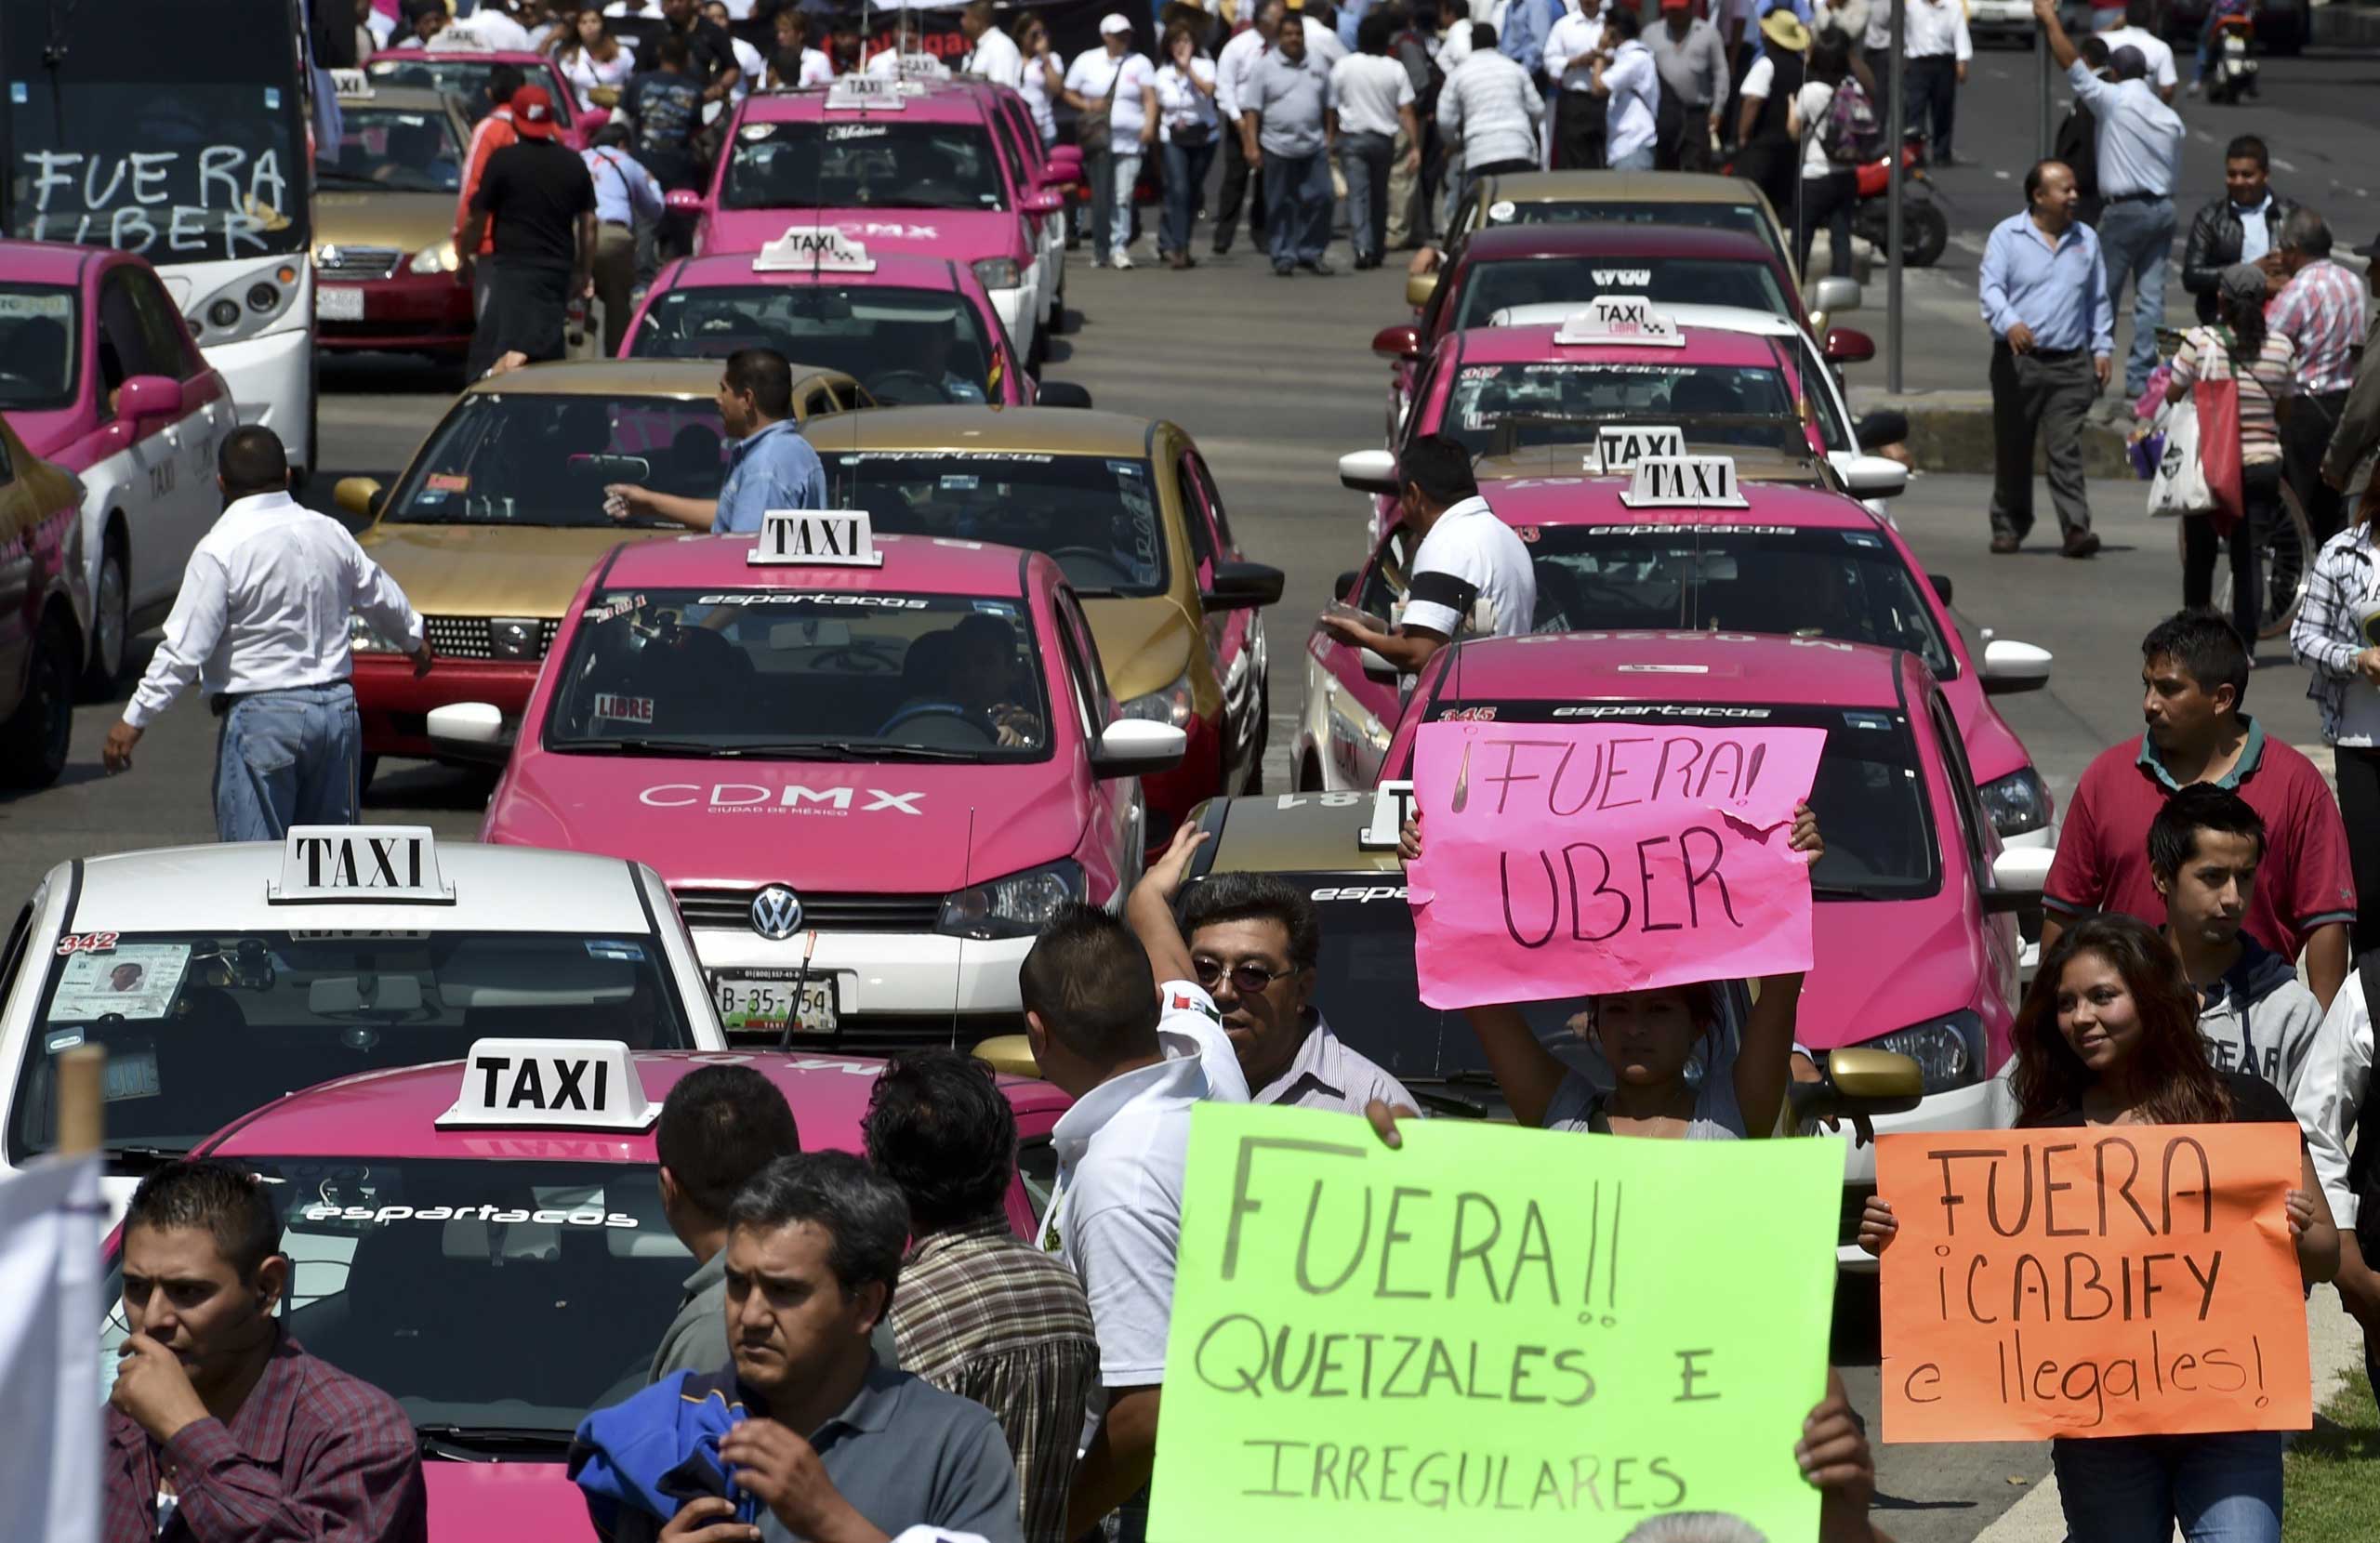 Taxi drivers take part in a protest against the private taxi company Uber for alleged unfair competition, in Mexico City on May 25, 2015. (Yuri Cortez—AFP/Getty Images)